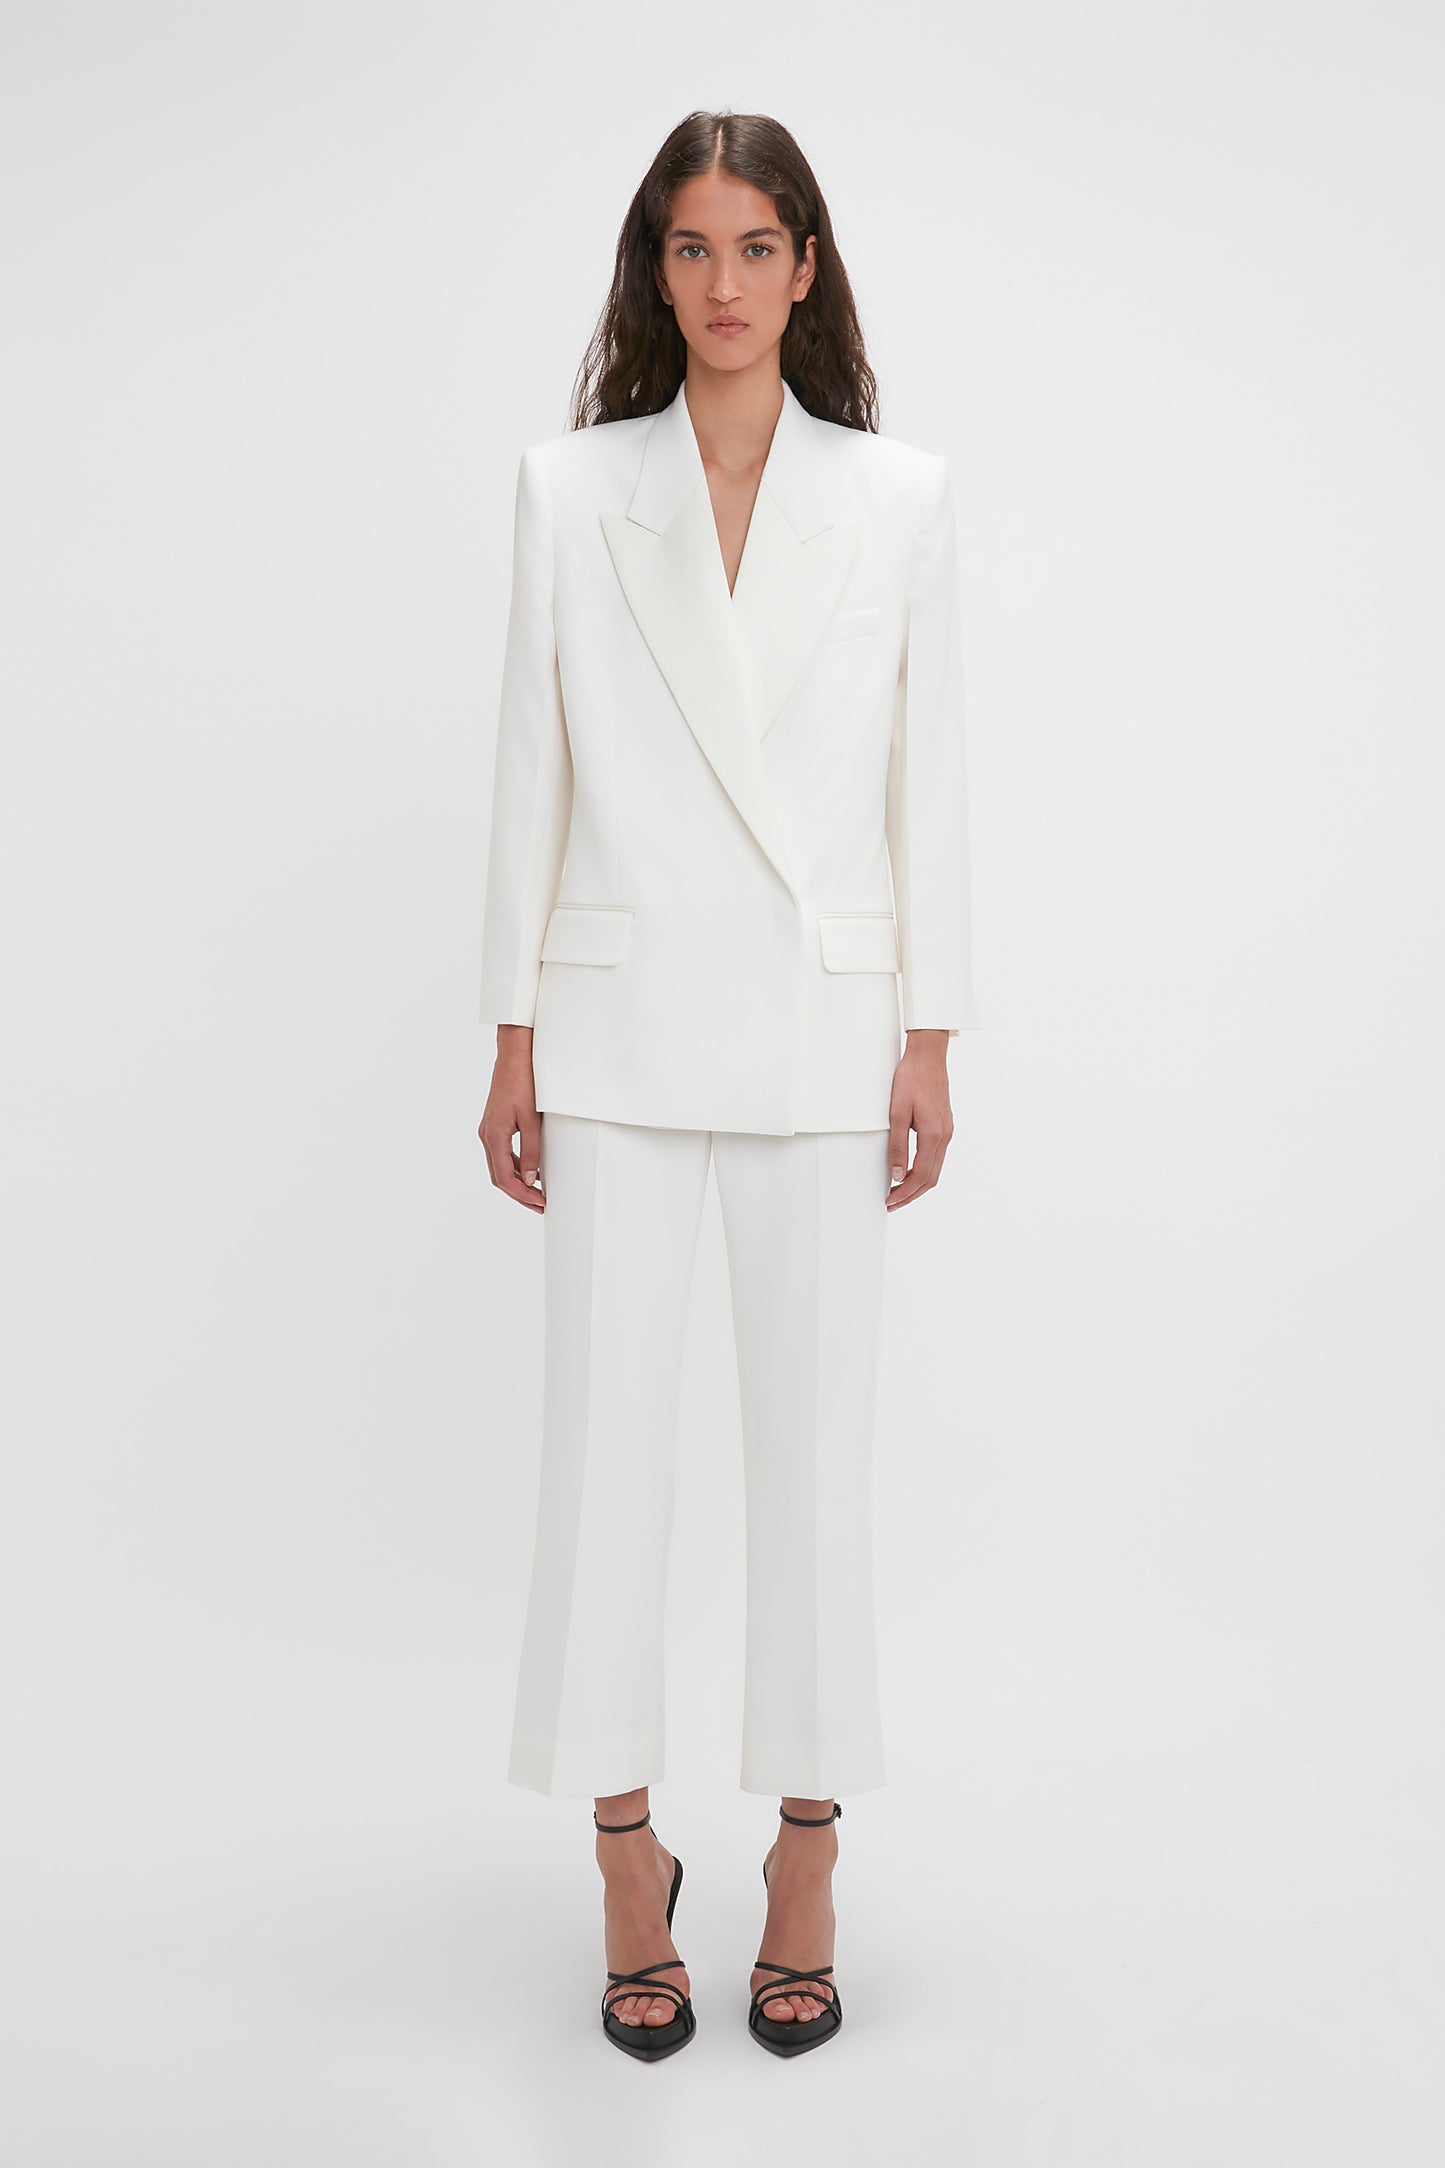 Exclusive Double Breasted Tuxedo Jacket In Ivory